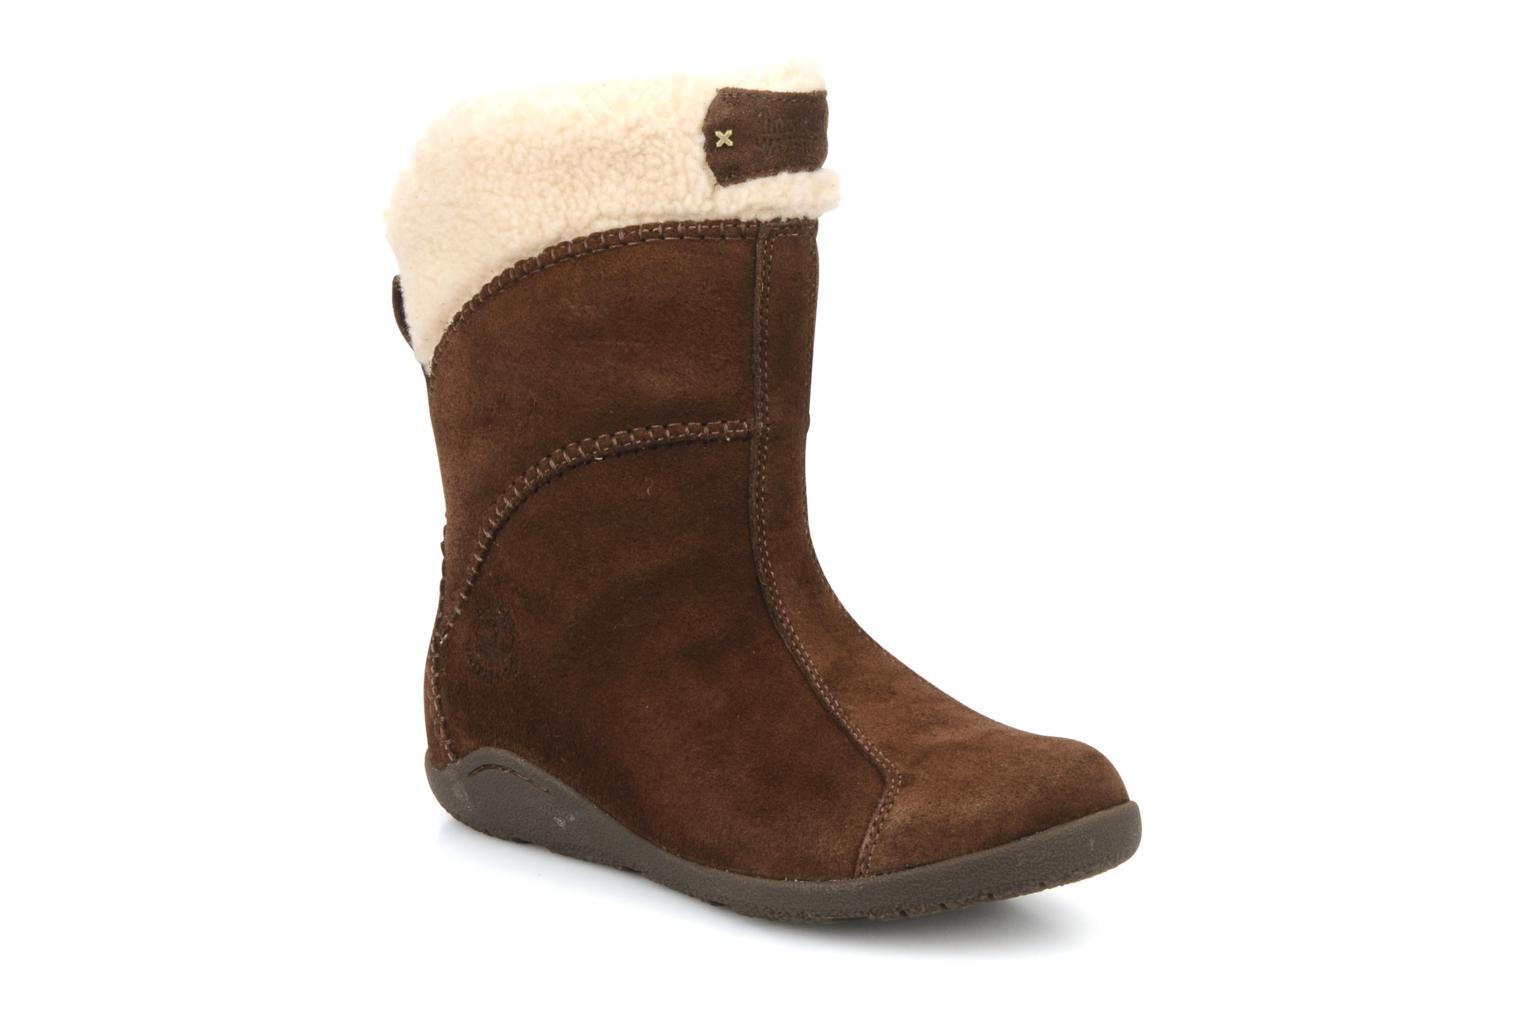 Foto Boots y Botines Timberland Avebury ankle boot Mujer foto 109881